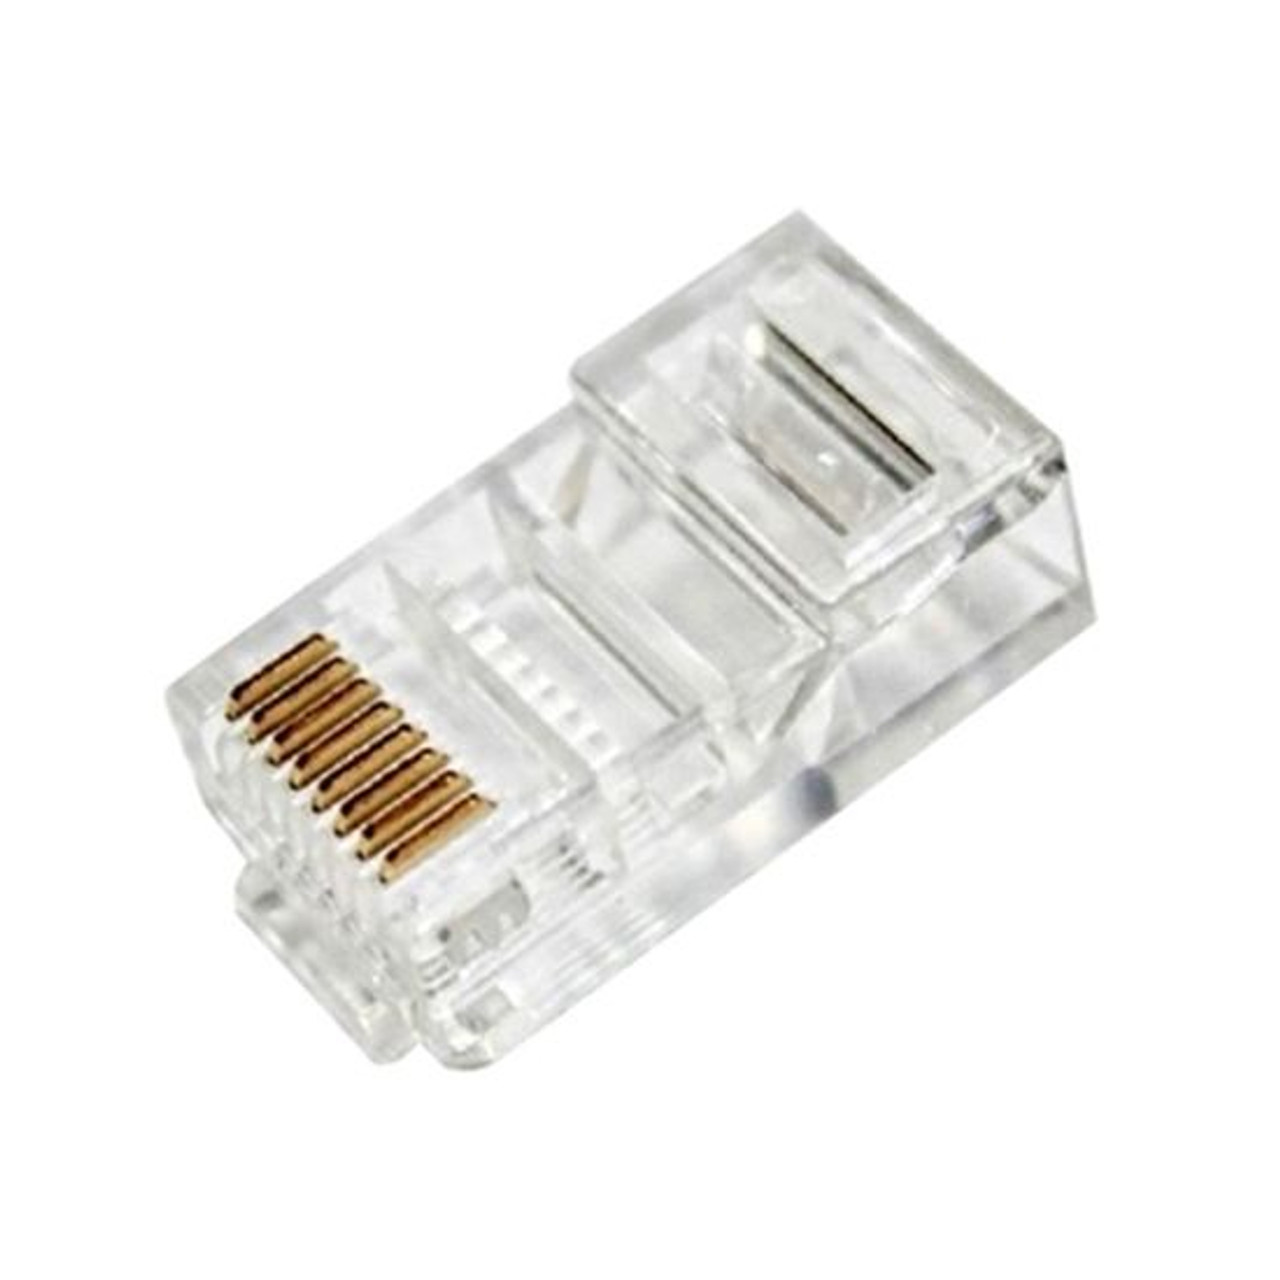 Eagle CAT5E Plug Connector RJ45 50 Pack Gold Round Solid Plate 8 Position 8 Conductor 8P8C 50 Pack Male Network 8 Pin Computer Ethernet Data Telephone Line RJ-45 Plugs for Cat 5e